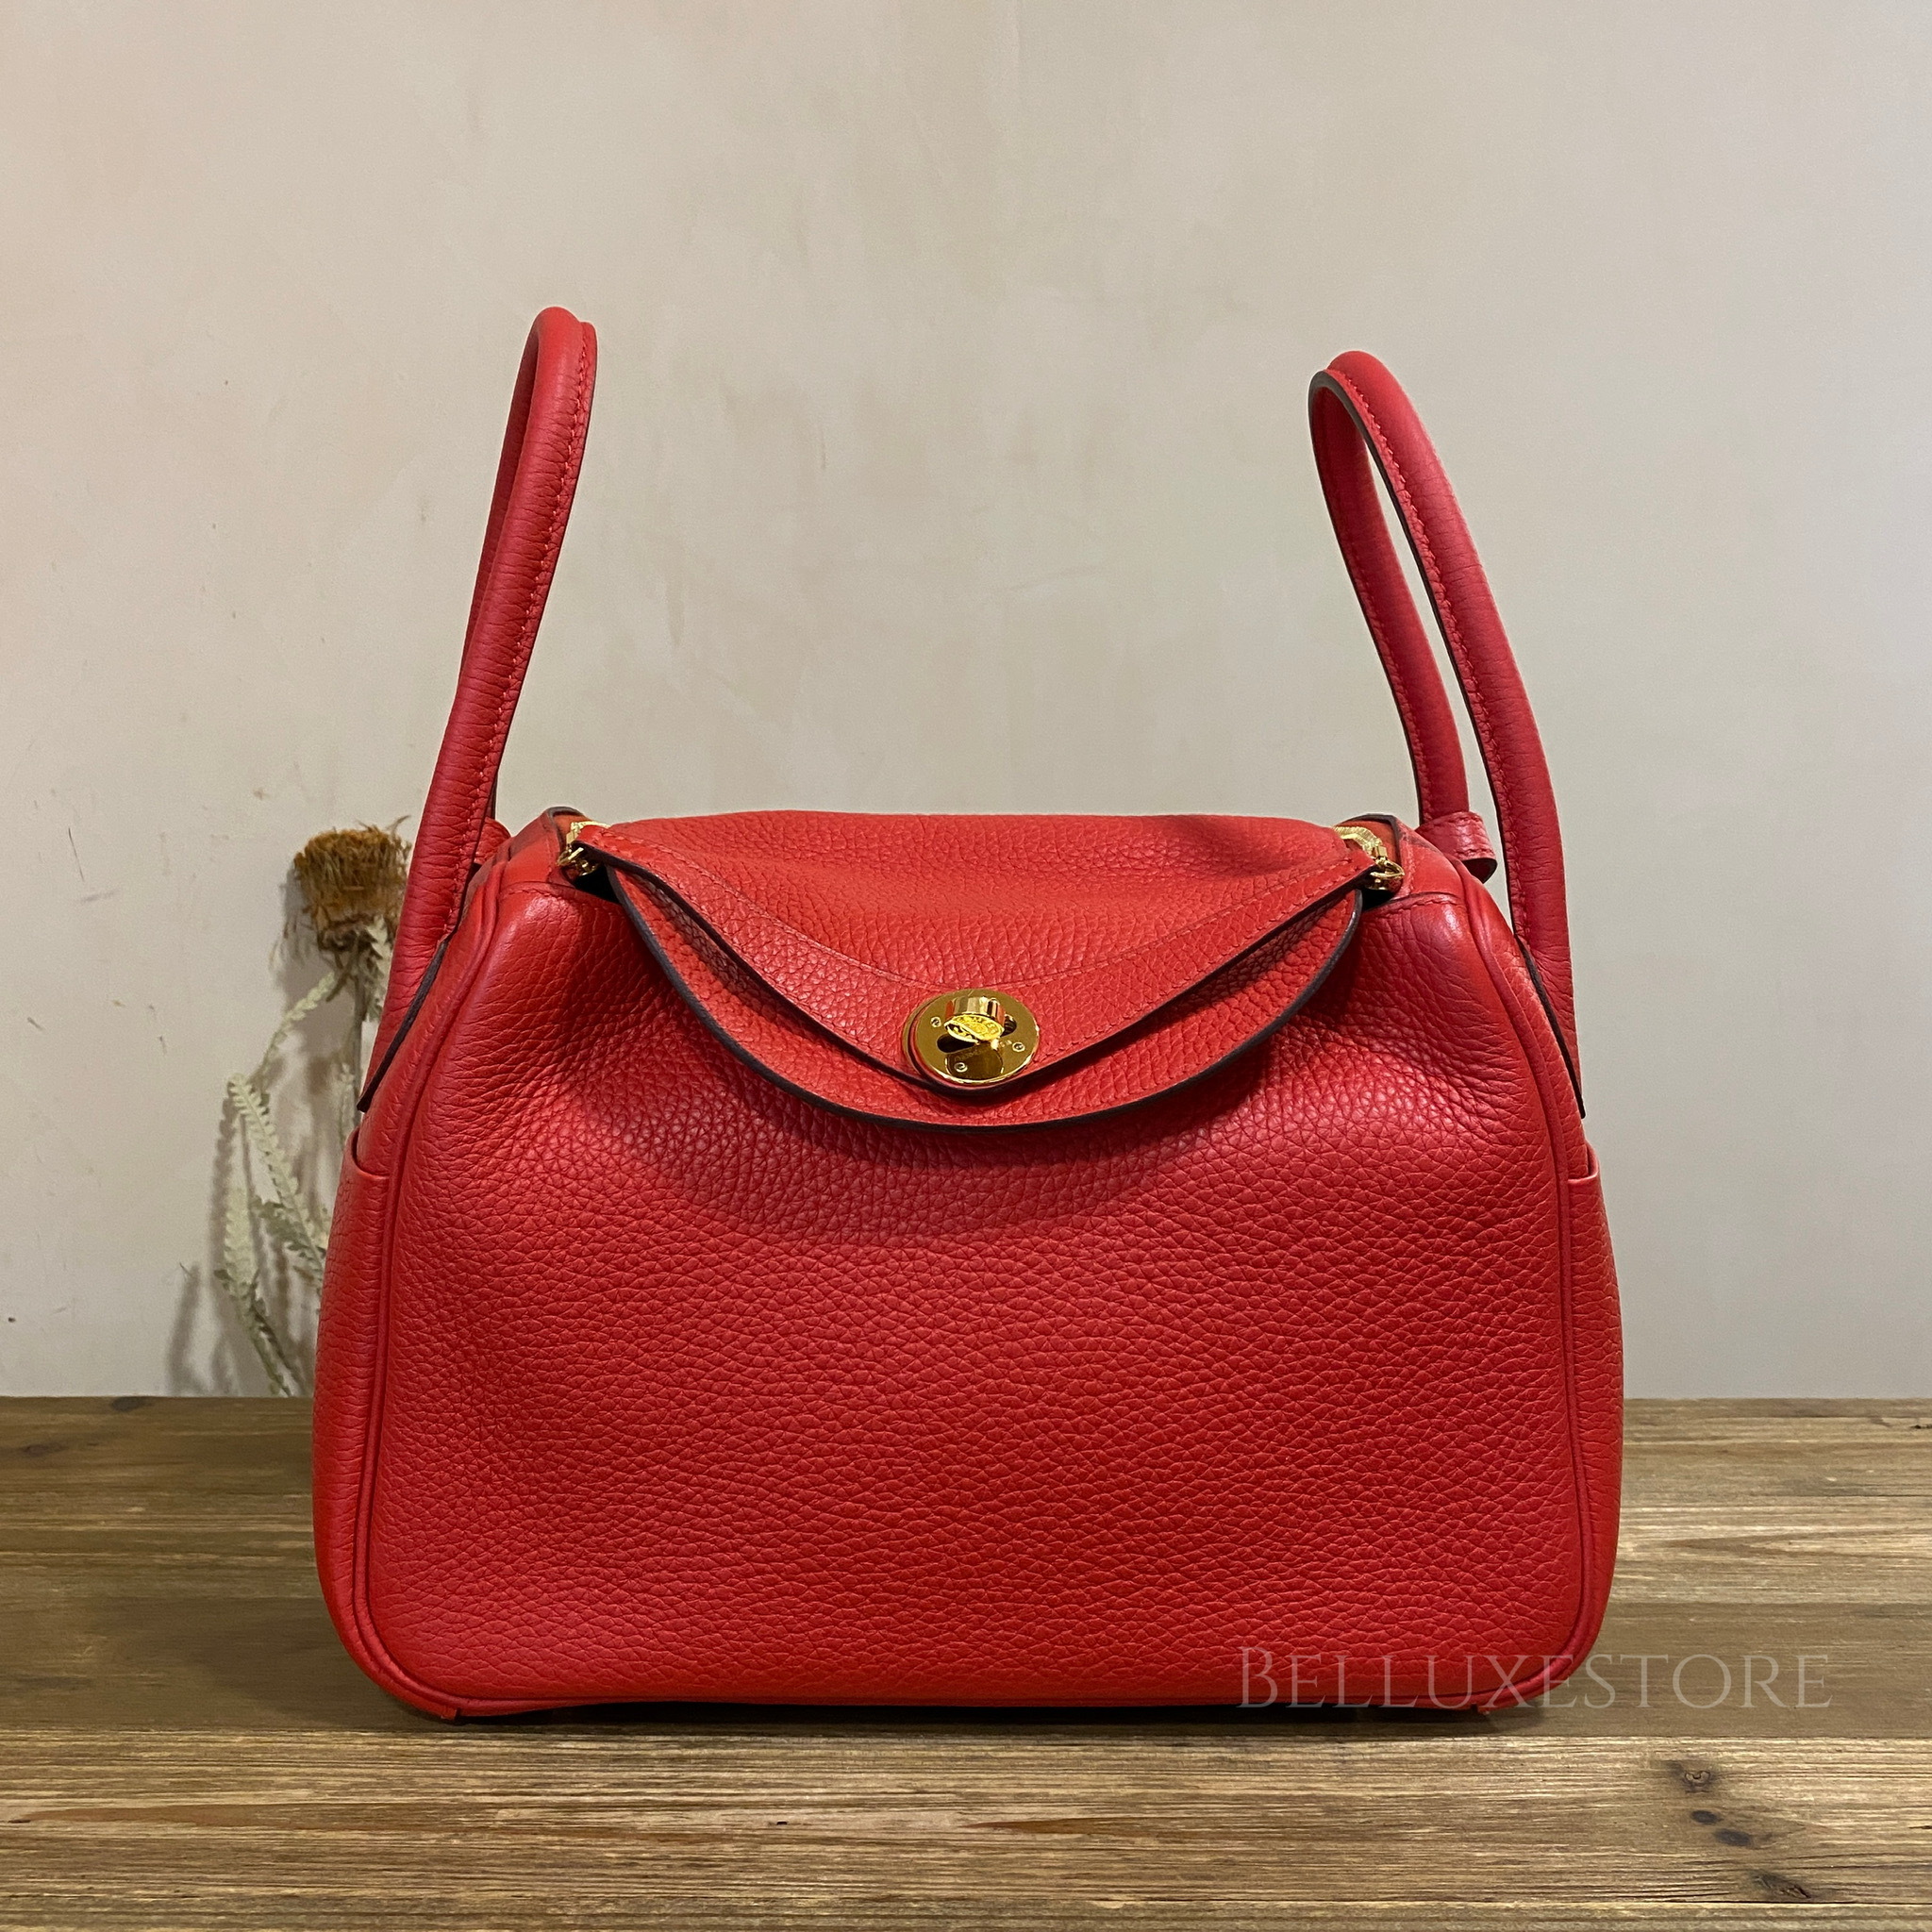 SOLD) Brand New Unused Hermes Lindy 26 Rouge Tomate Clemence PHW